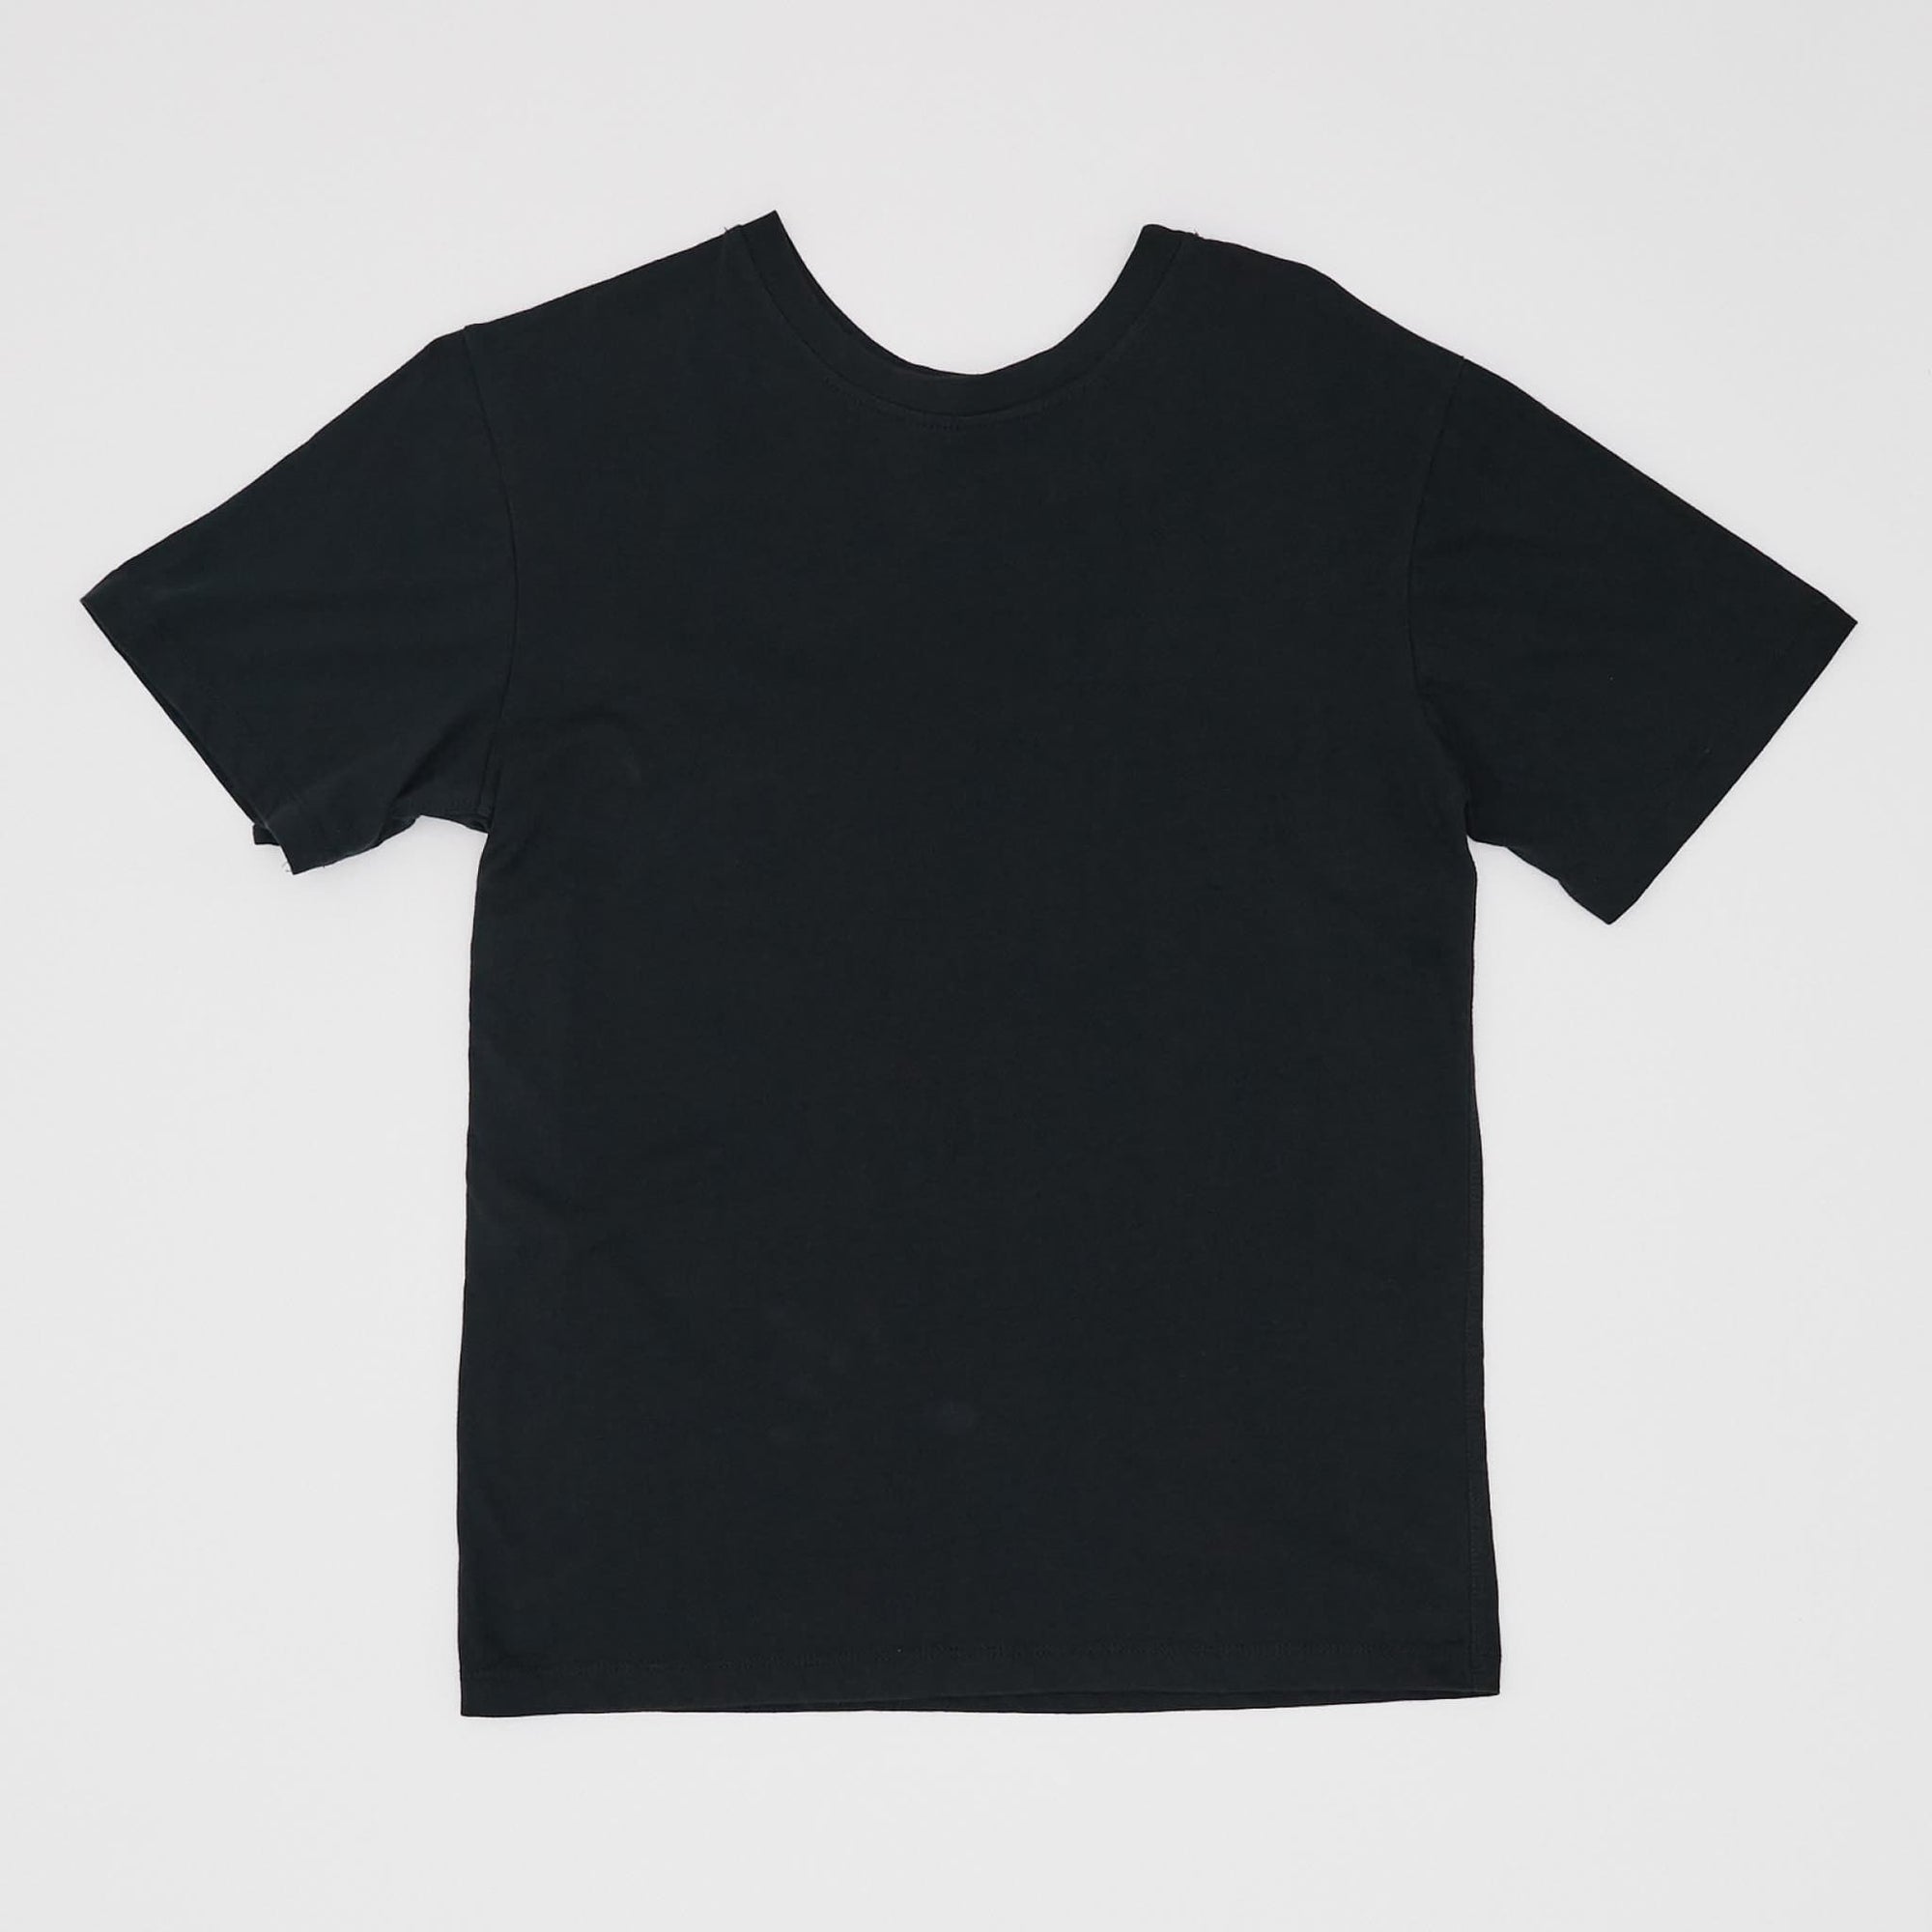 The Side Opening T-Shirt -Kids sizing T-shirt - The Shapes United